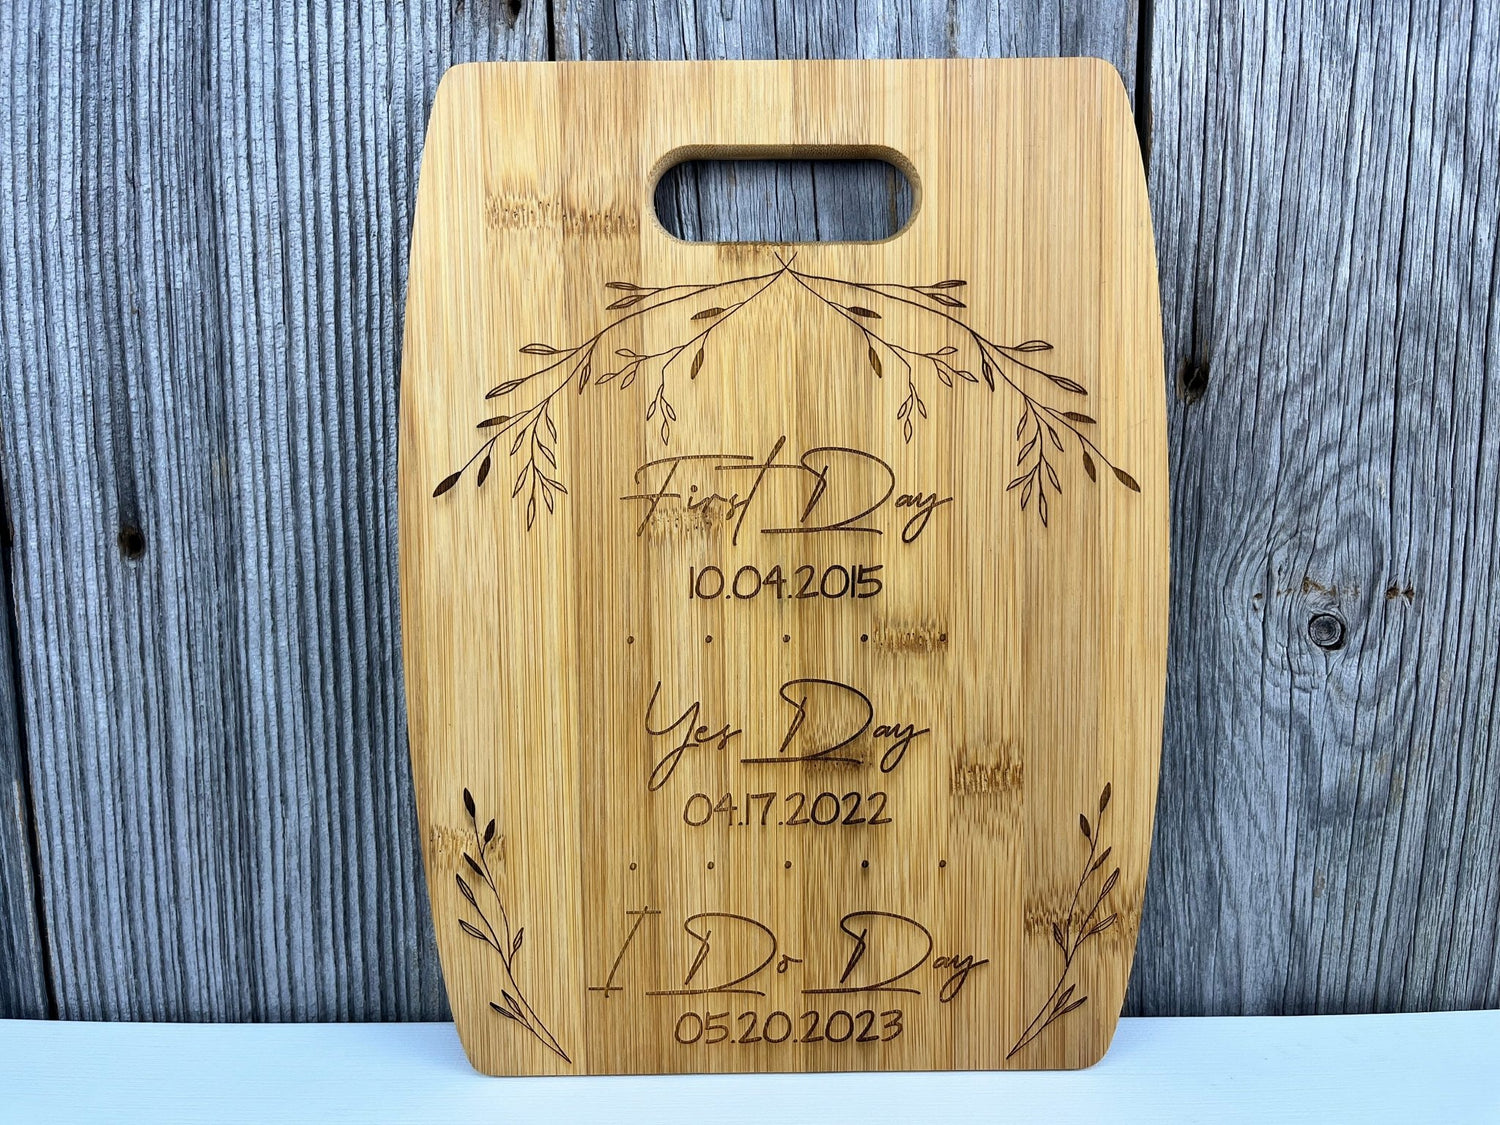 First Day - Yes Day - I Do Day Décor - Personalized Wedding Date Cutting Board - Legacy Images - Cutting Boards